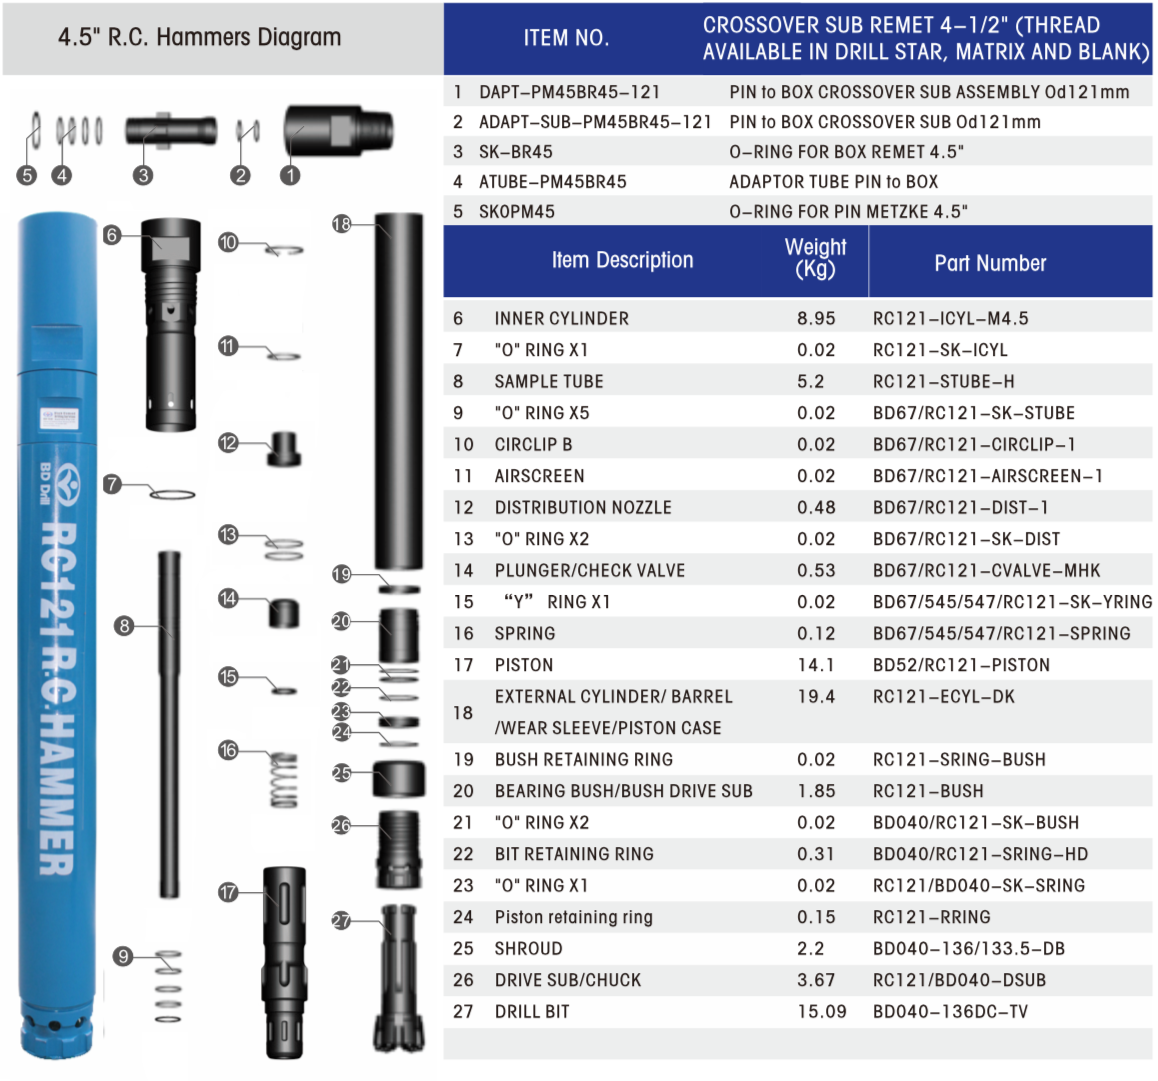 Black Diamond Drilling RC121-BD040 RC Reverse Circulation Hammer schematic and parts list